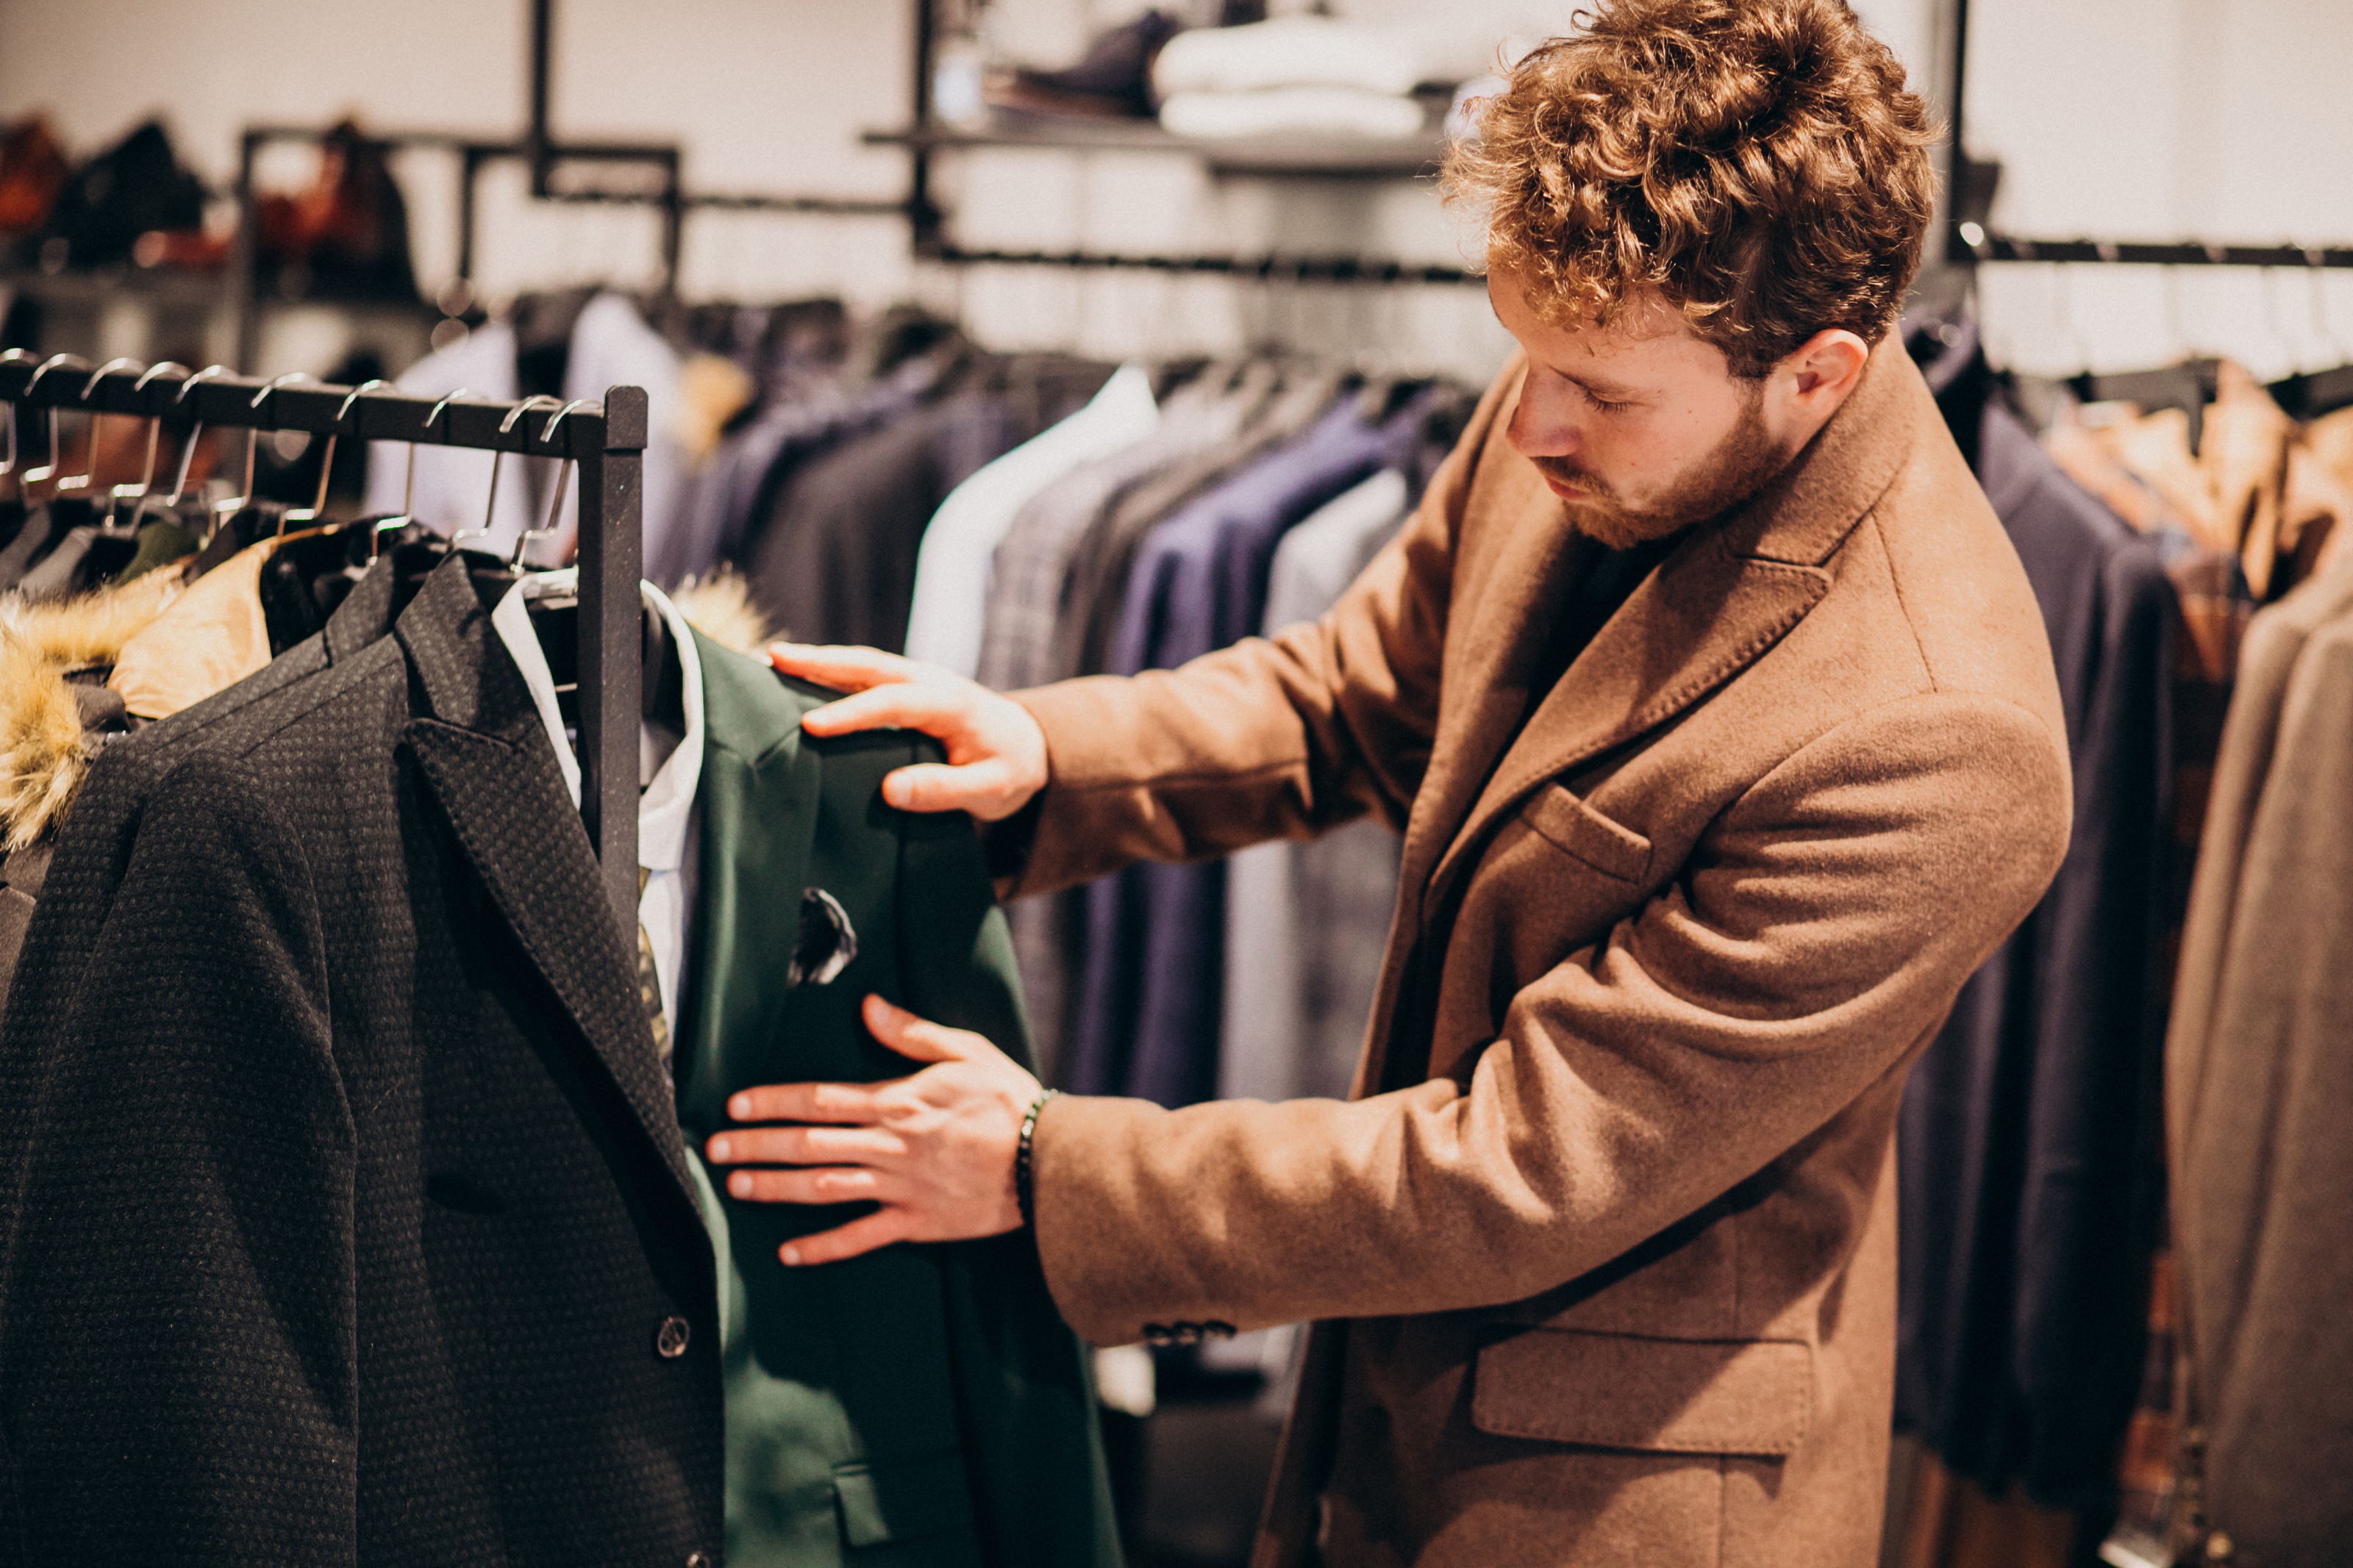 A man looking at outfits curiously | Source: Freepik